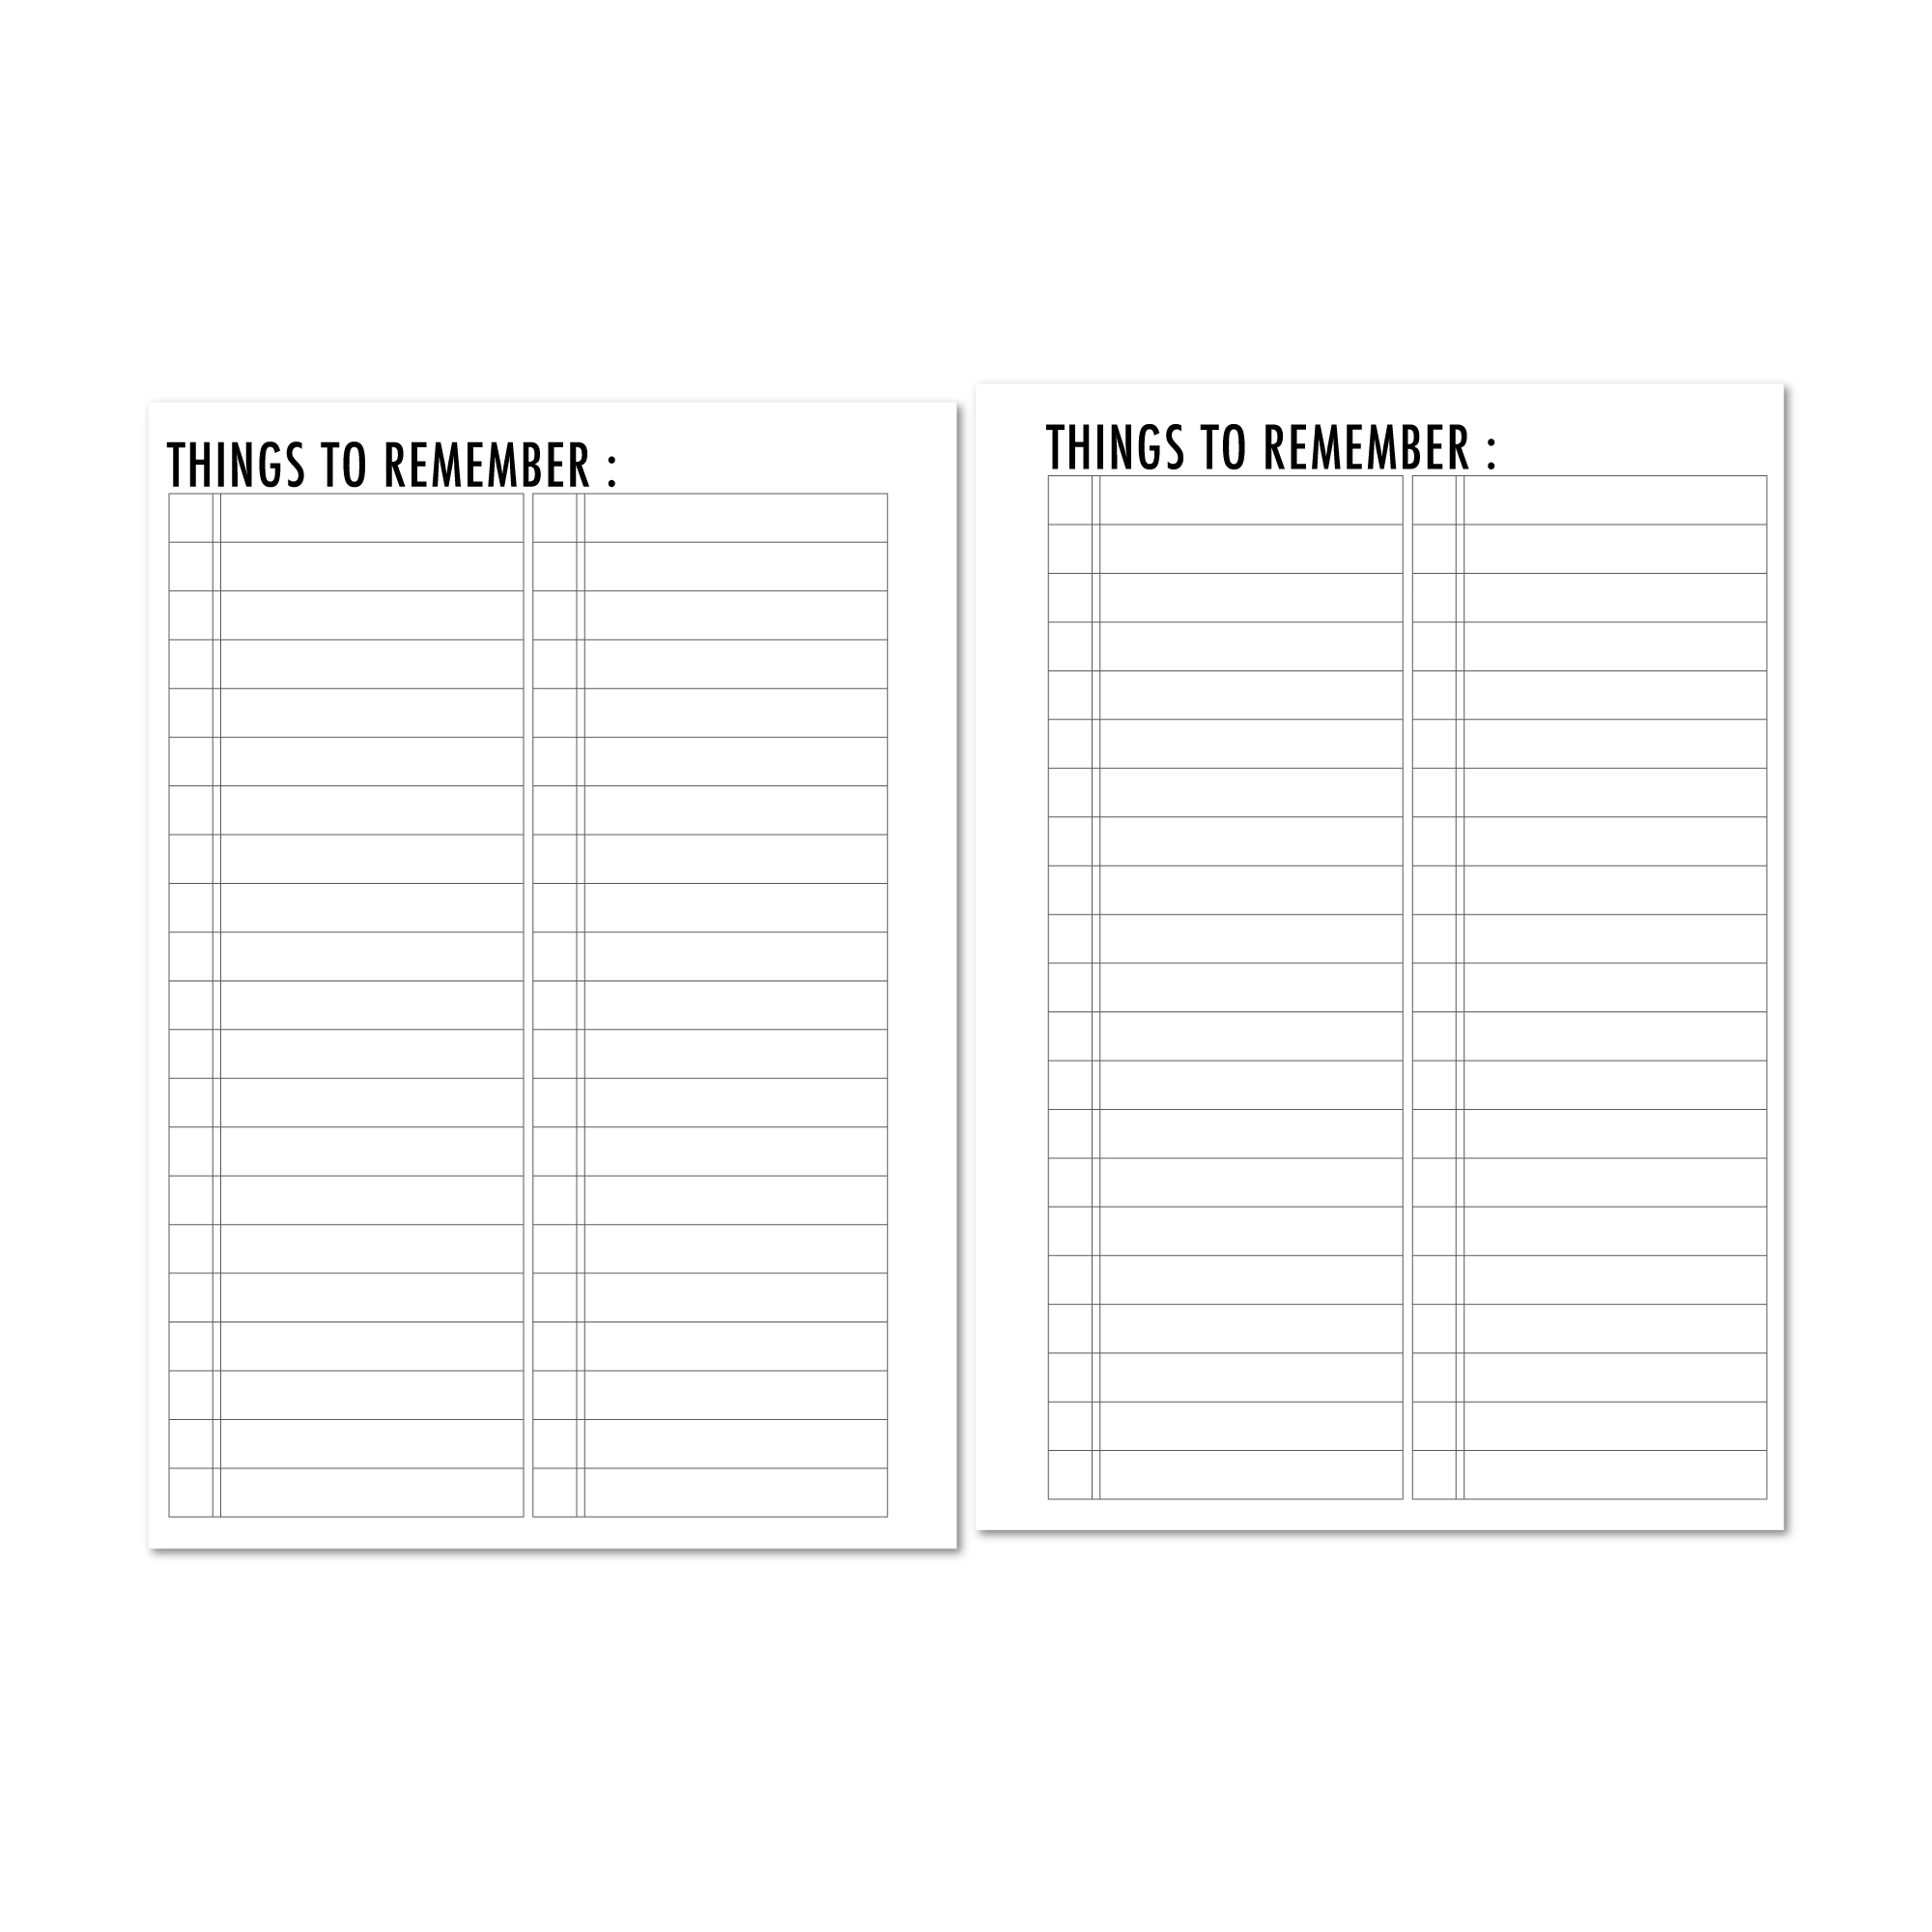 Things to Remember checklist